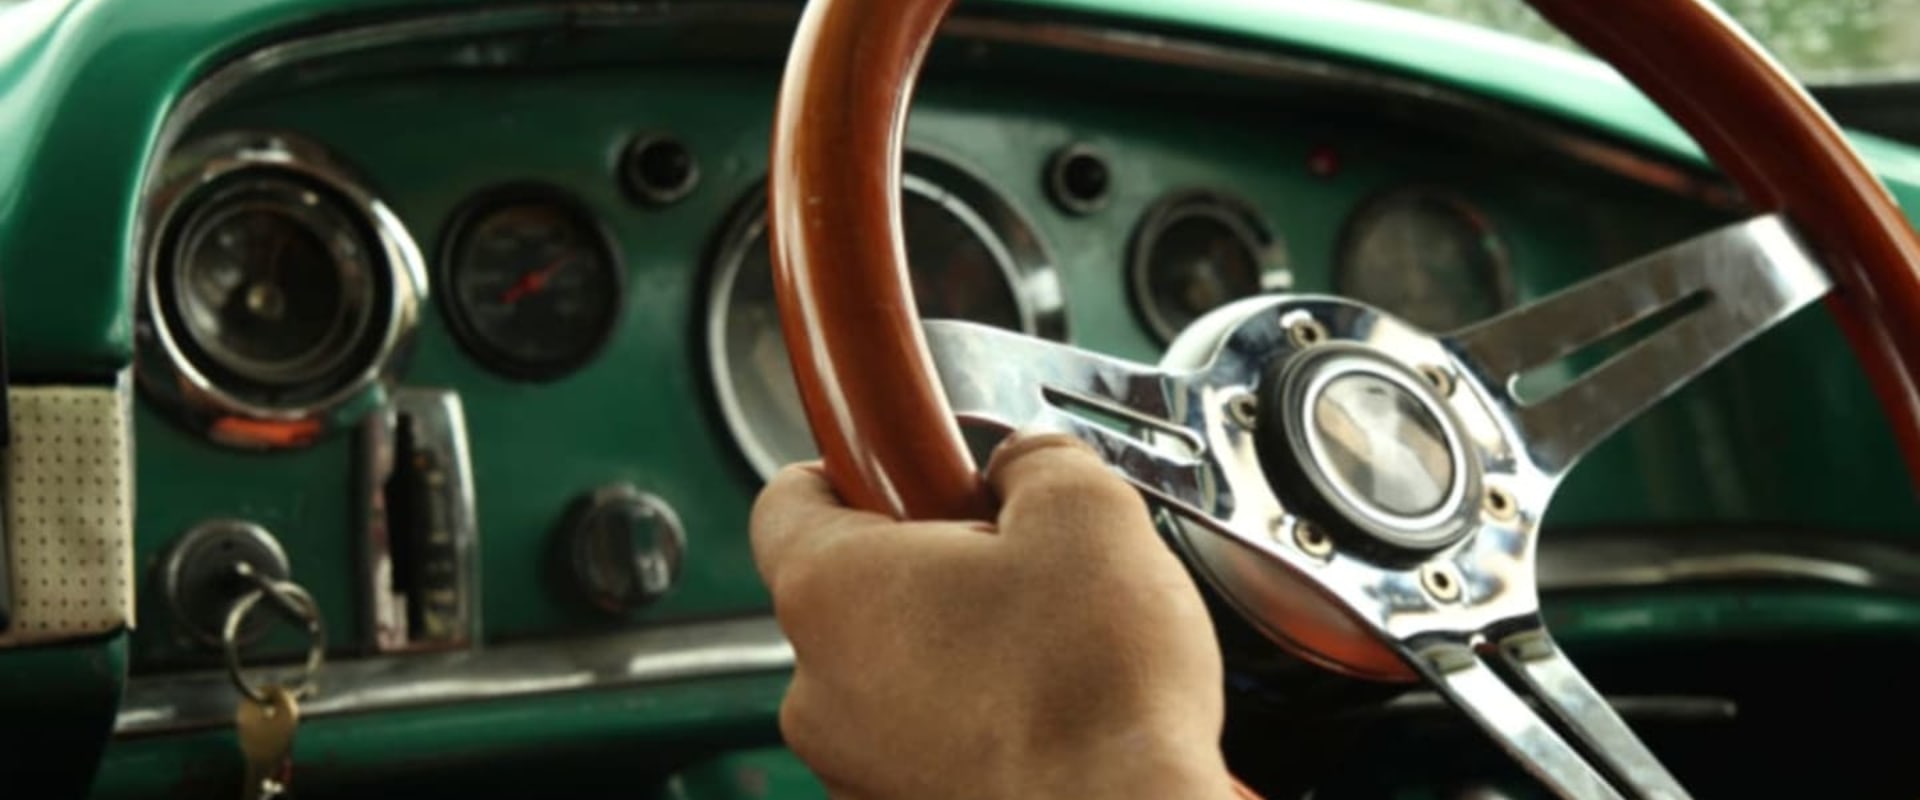 Activating Vehicle Features on Your Classic Car